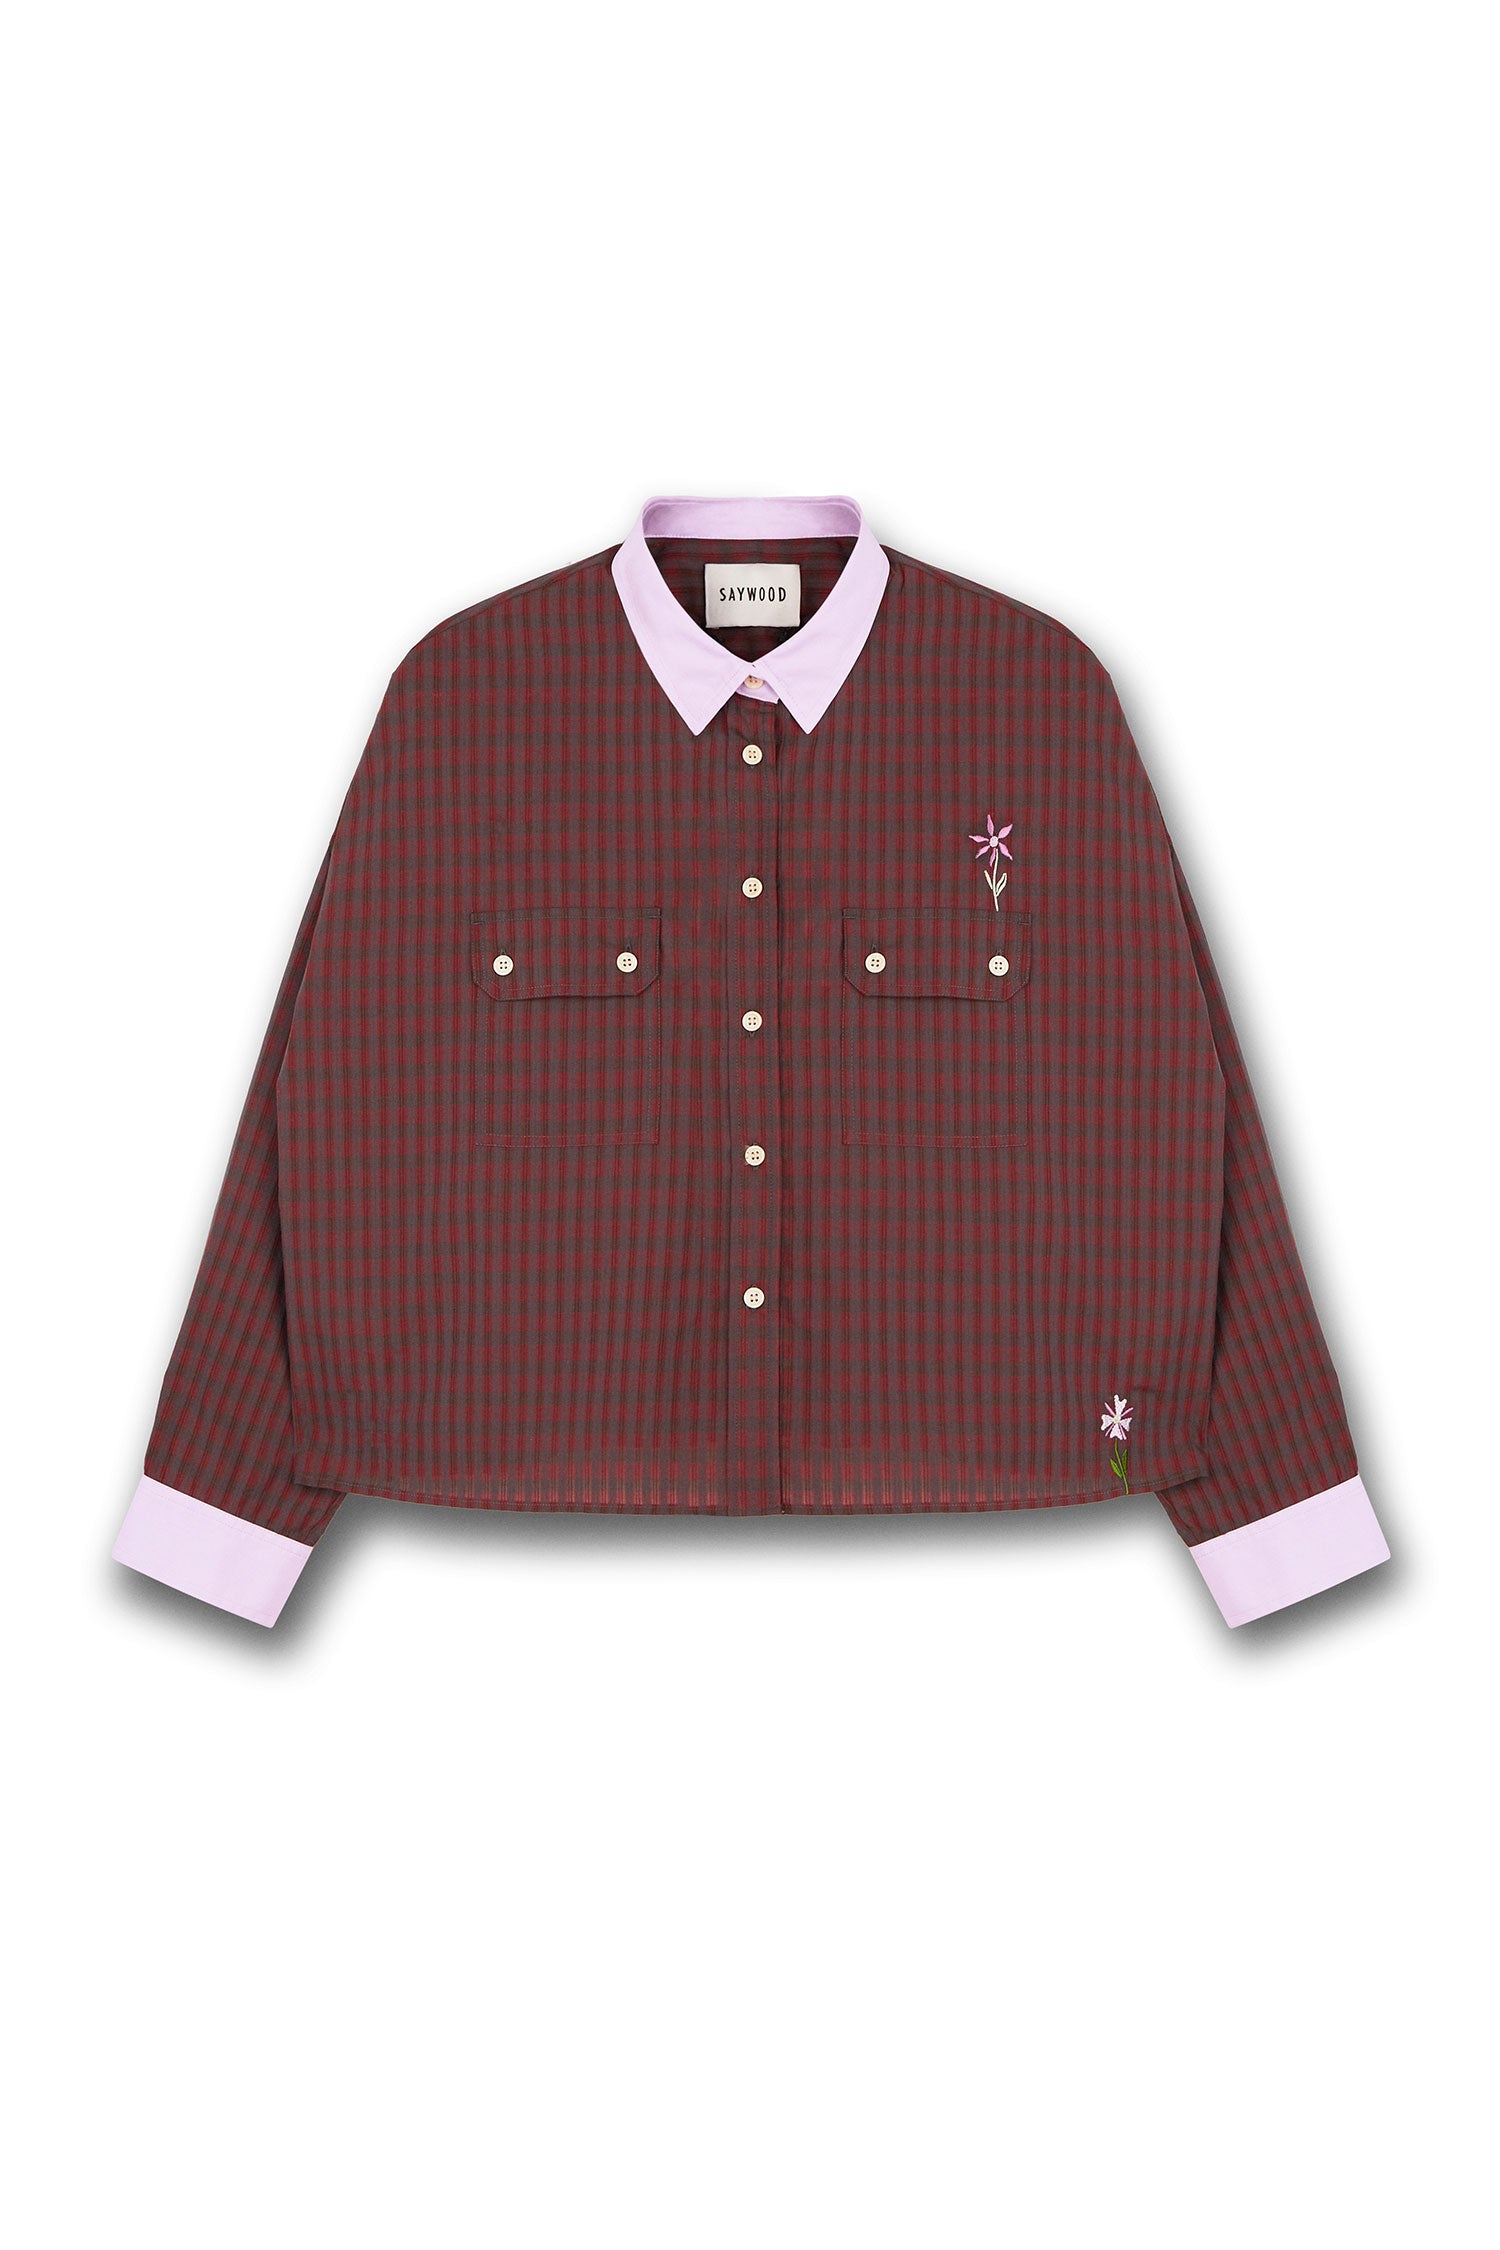 Red Check Boxy Shirt, Jules Utility Shirt by Saywood, made in London